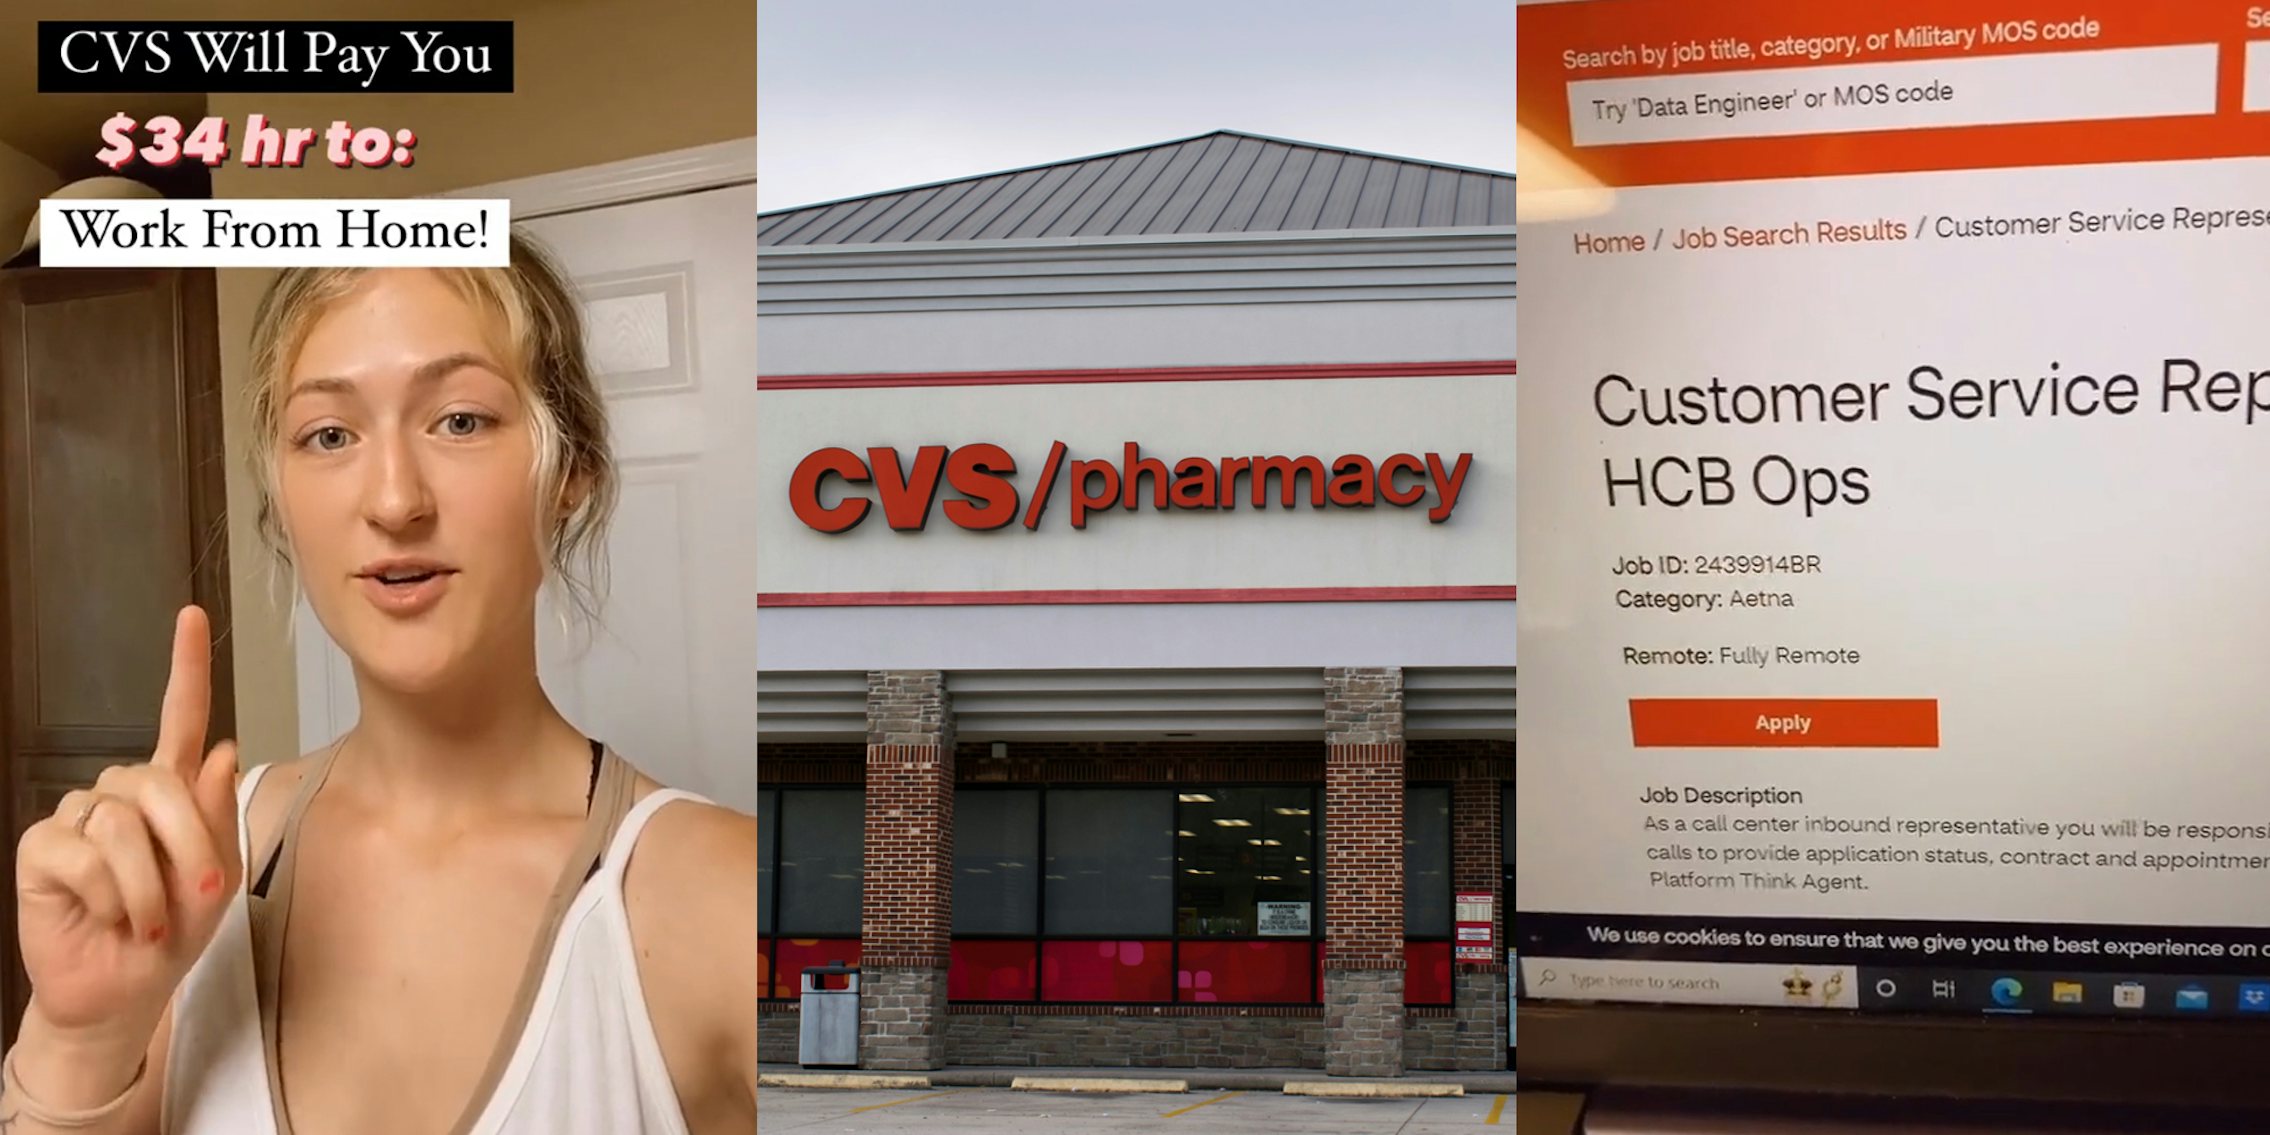 worker speaking with caption 'CVS Will Pay You $34 hr to: Work From Home!' (l) CVS/Pharmacy sign on building (c) CVS website remote job listings on computer screen (r)